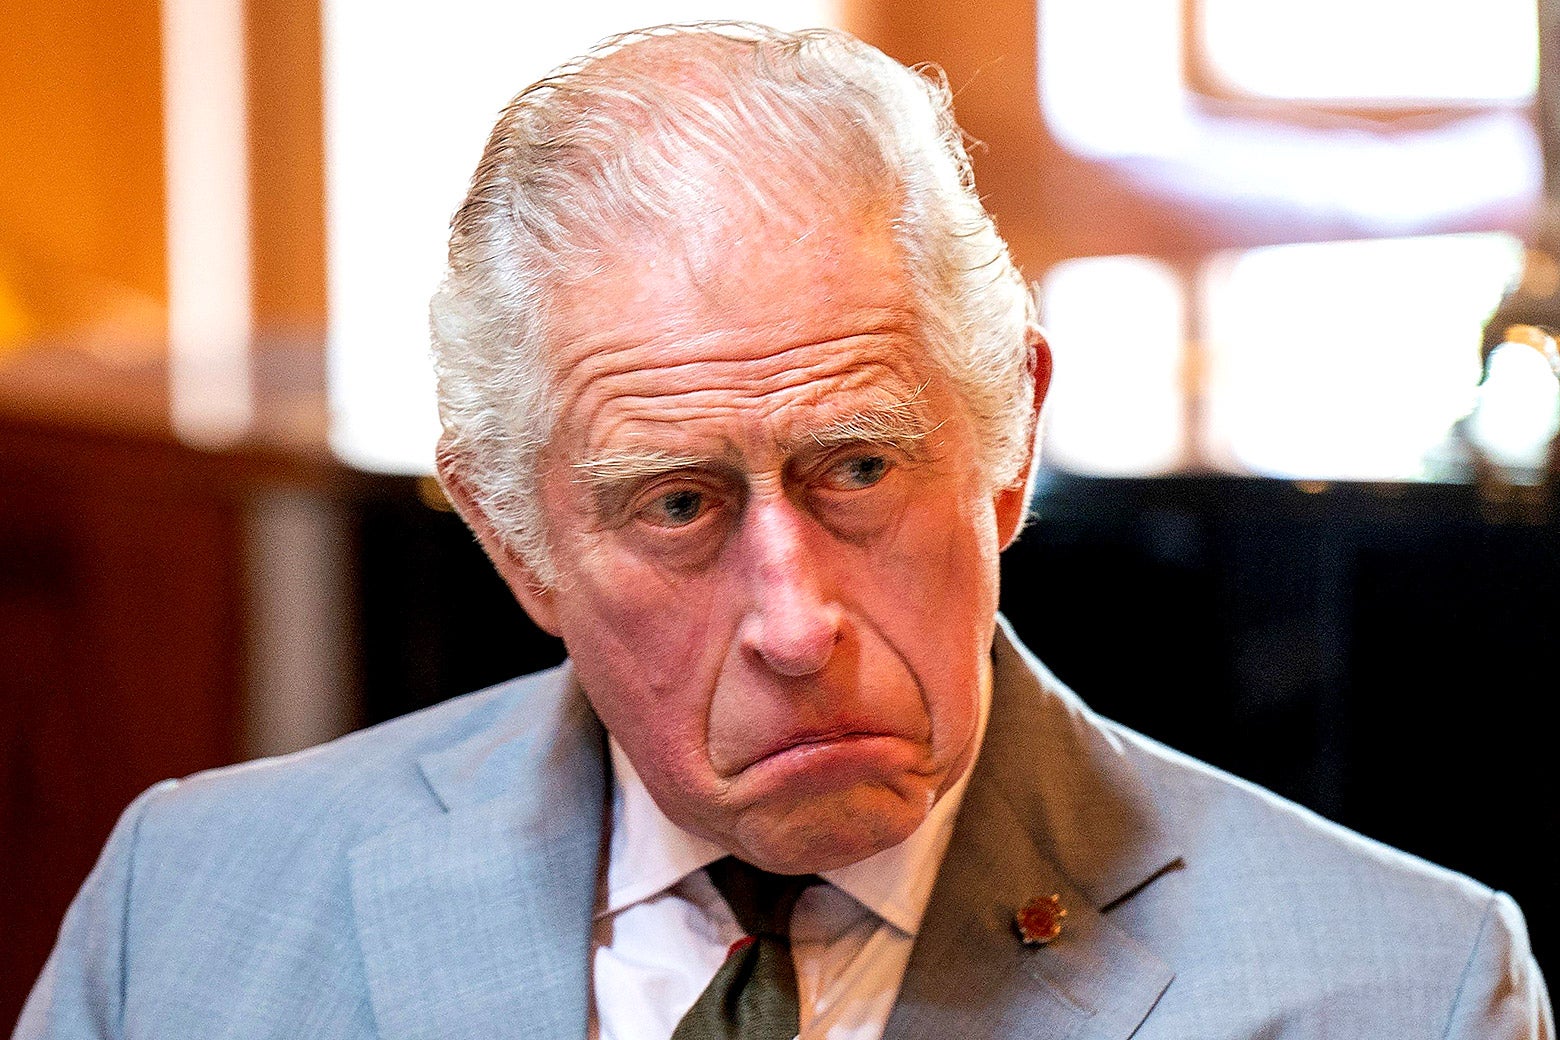 Britain's Prince Charles, now King Charles, with a somber look on his face.